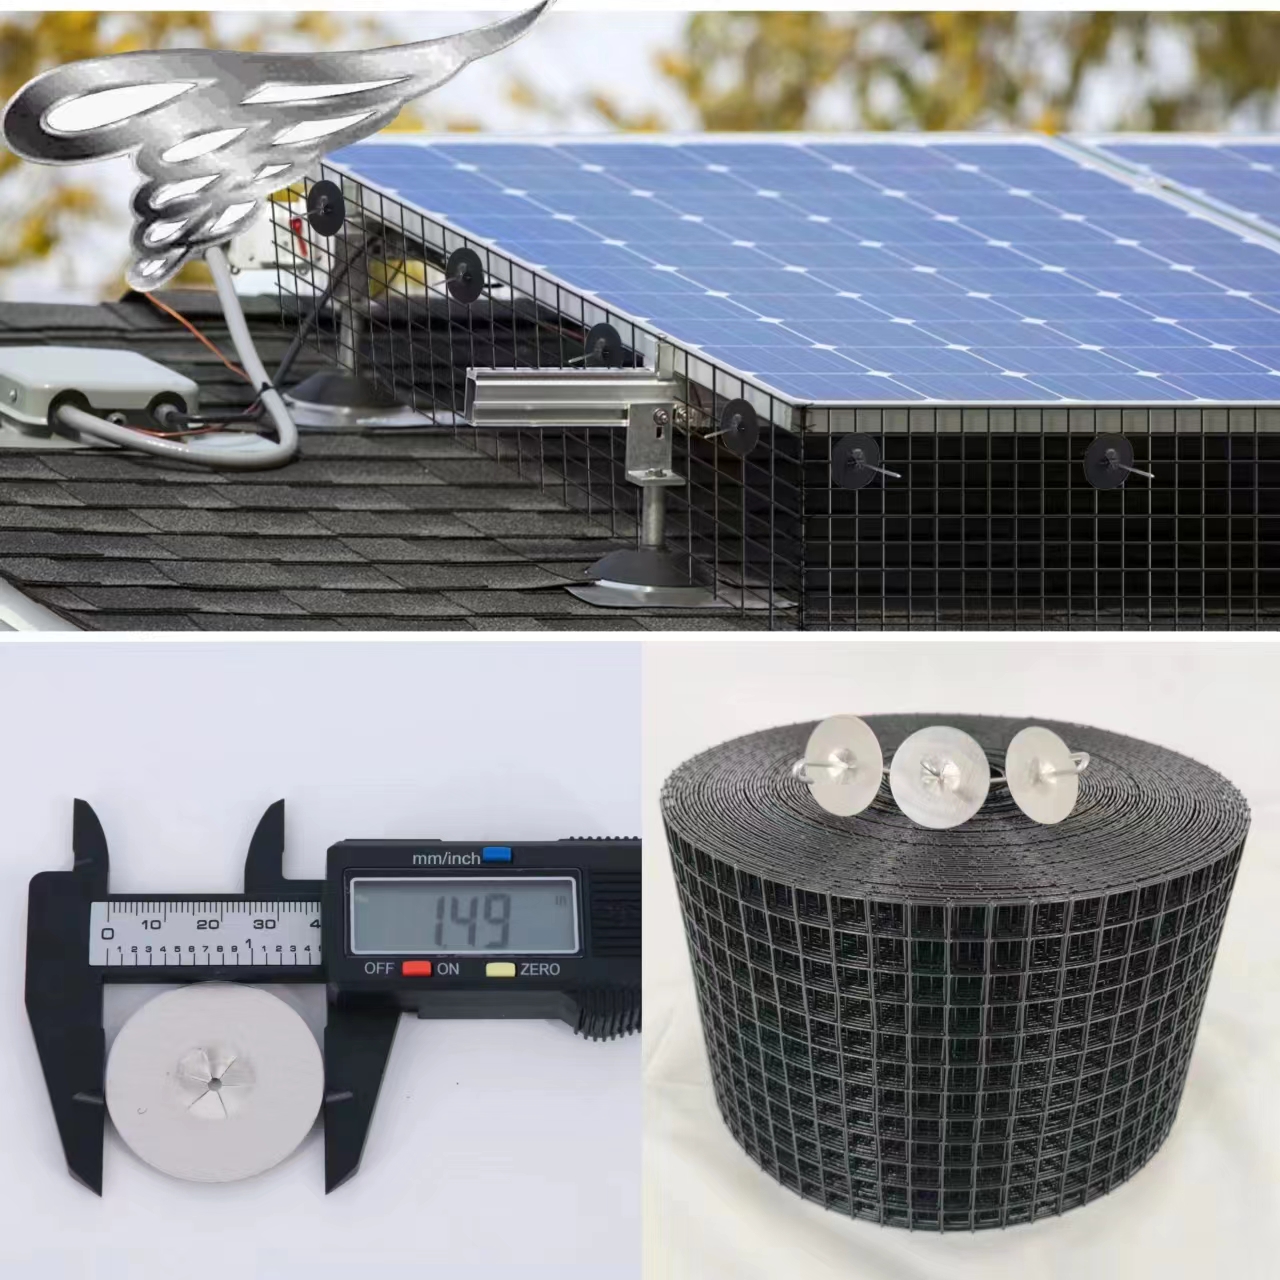 Revolutionary Solar Panel Mesh Redefines Bird-Proofing Standards with Advanced Features